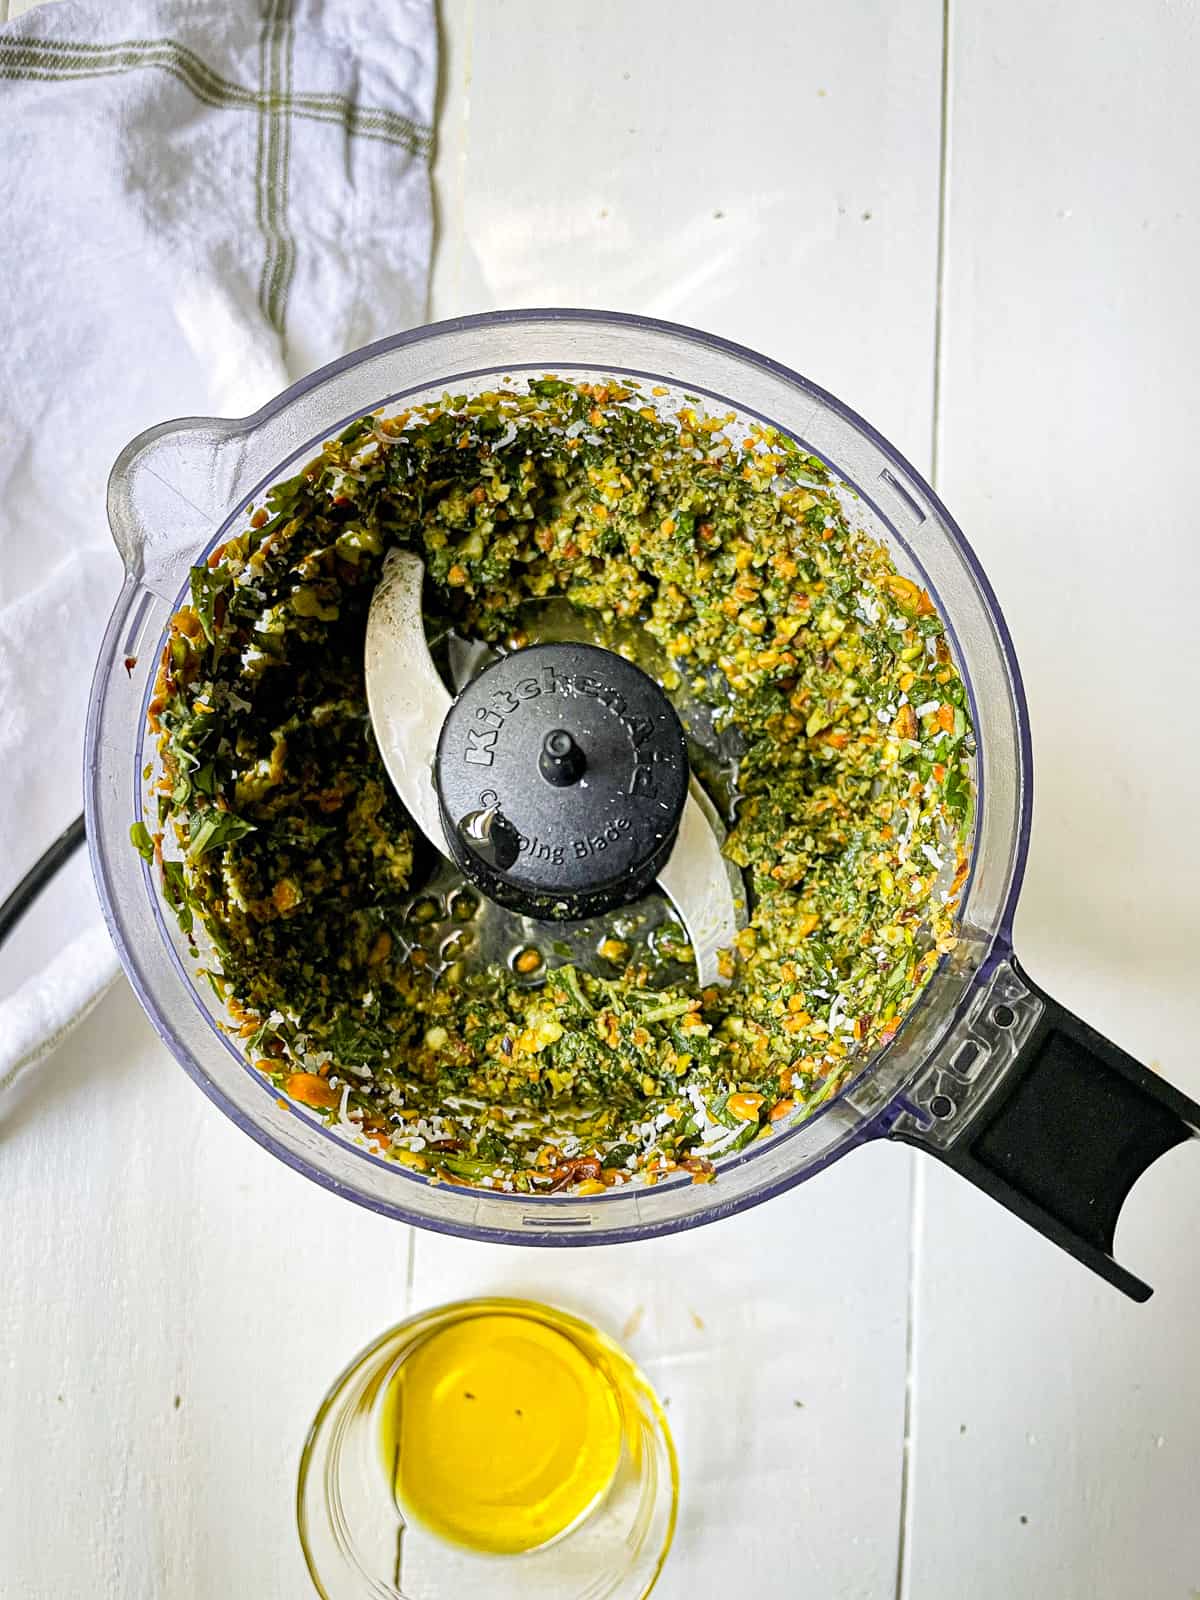 Ingredients to make pistachio pesto blended in a food processor with olive oil on the side.